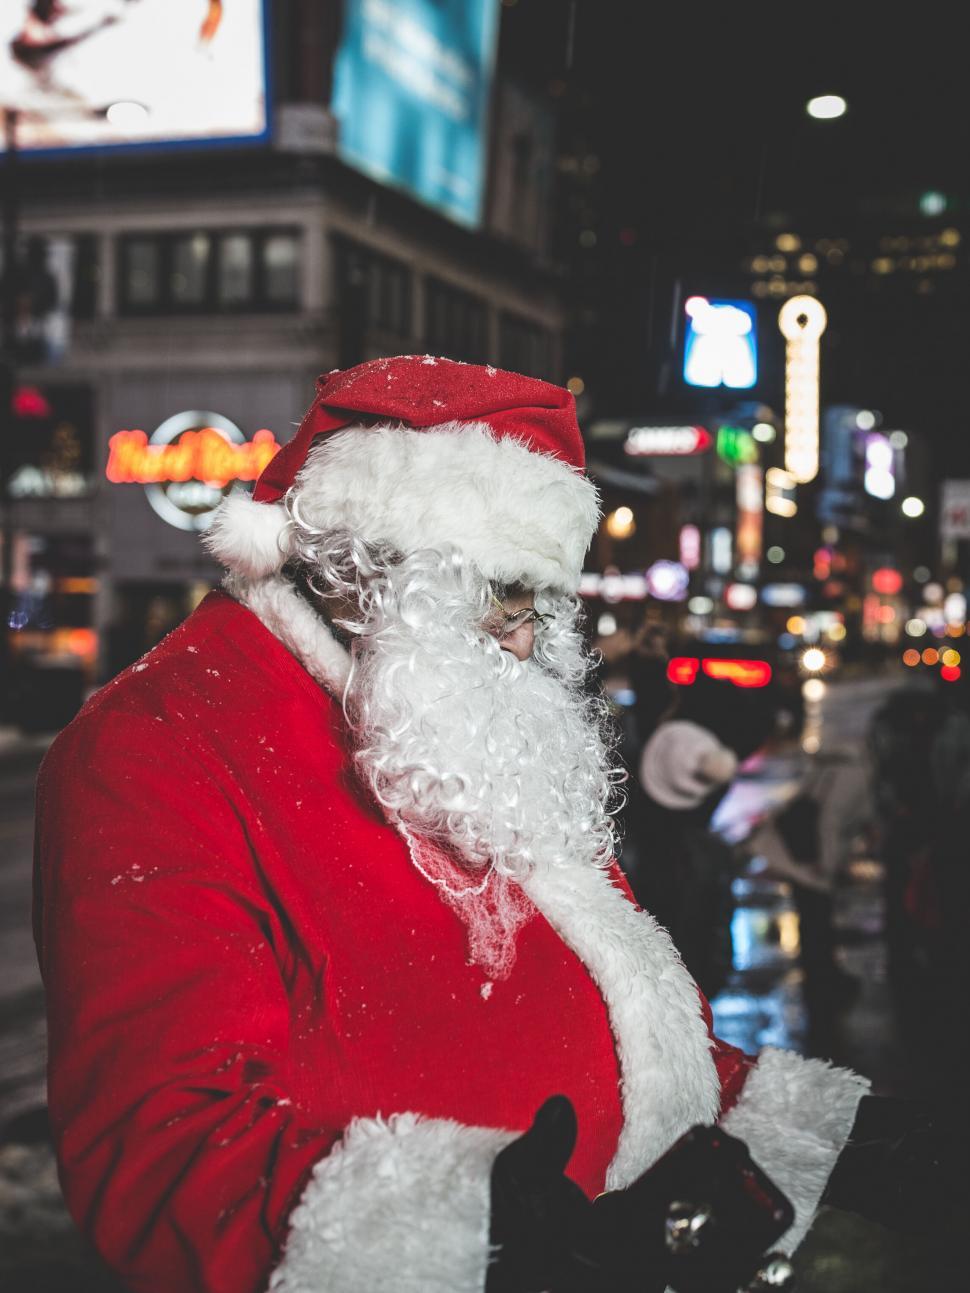 Free Image of Santa Claus in busy city night 